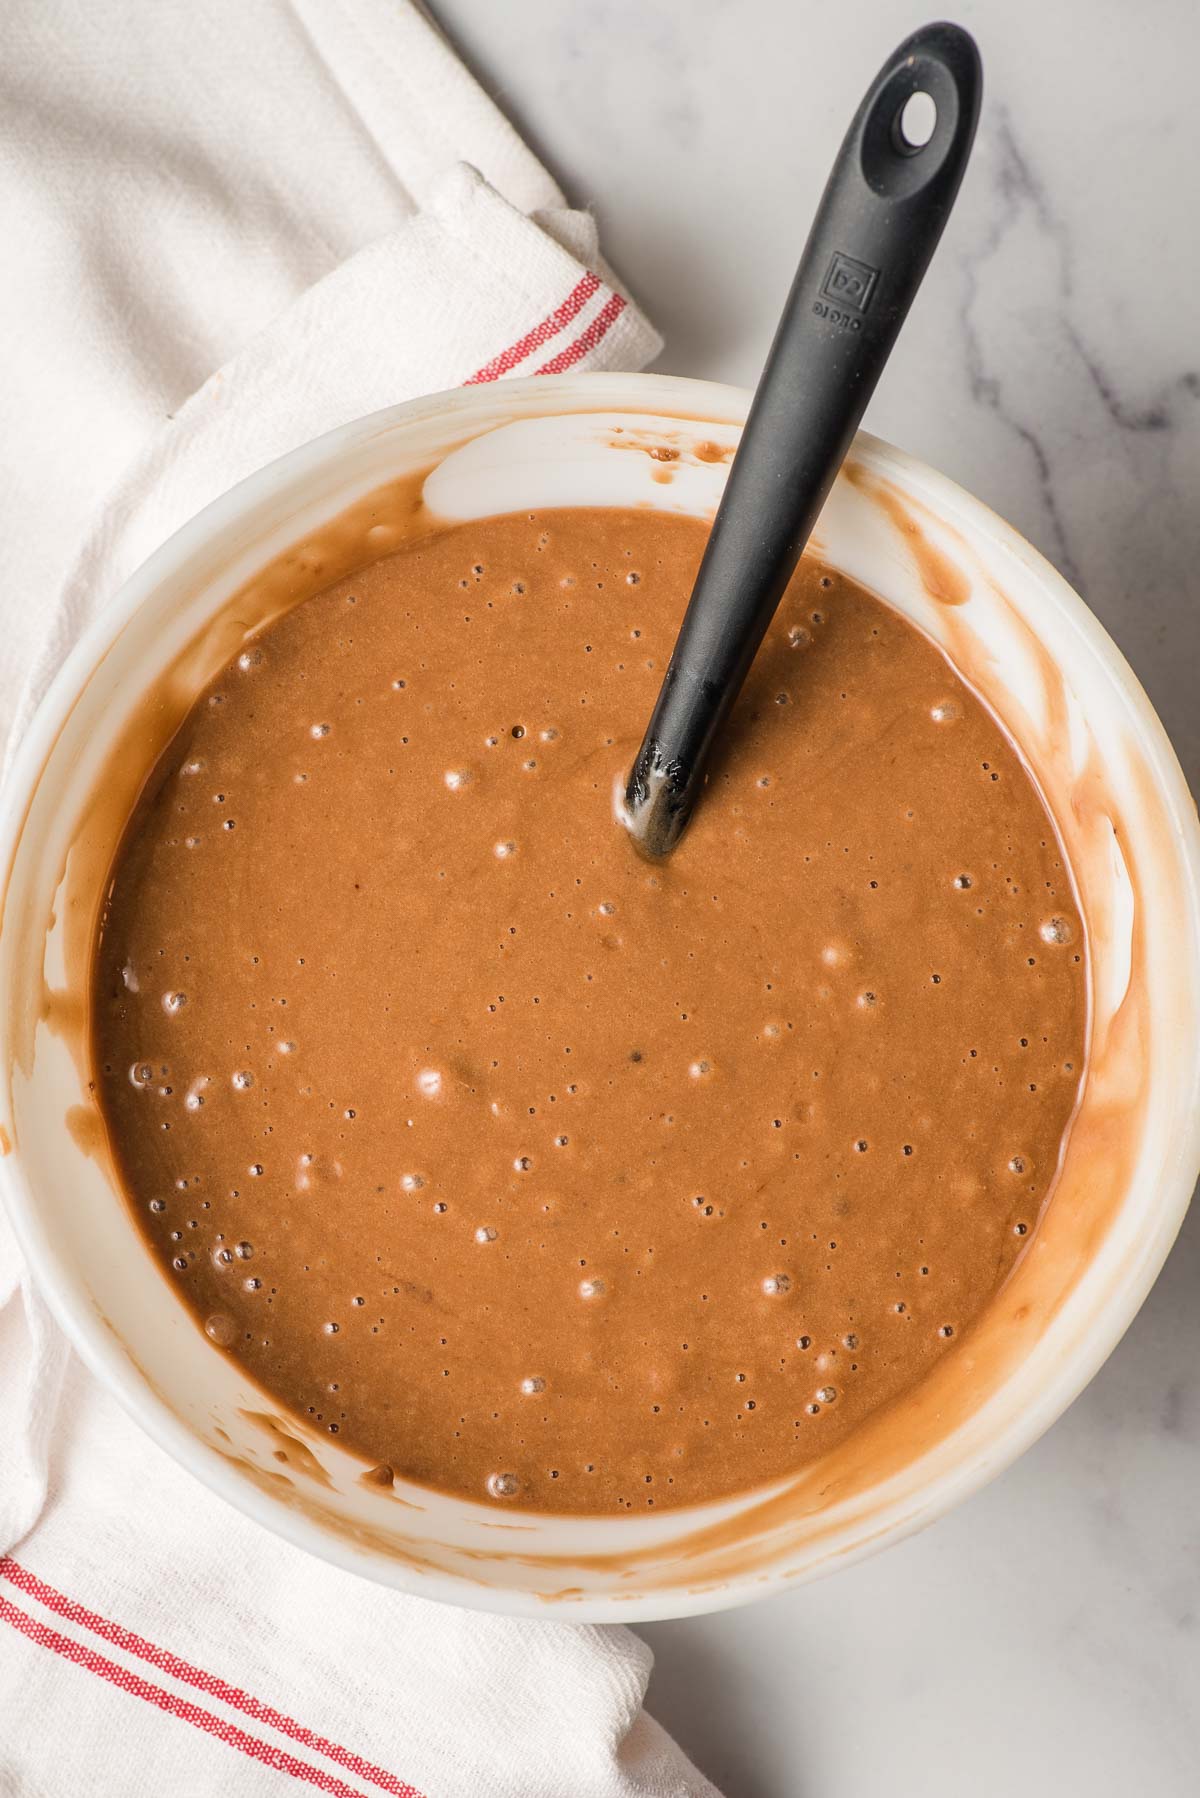 White mixing bowl with chocolate cake batter and a spatula.